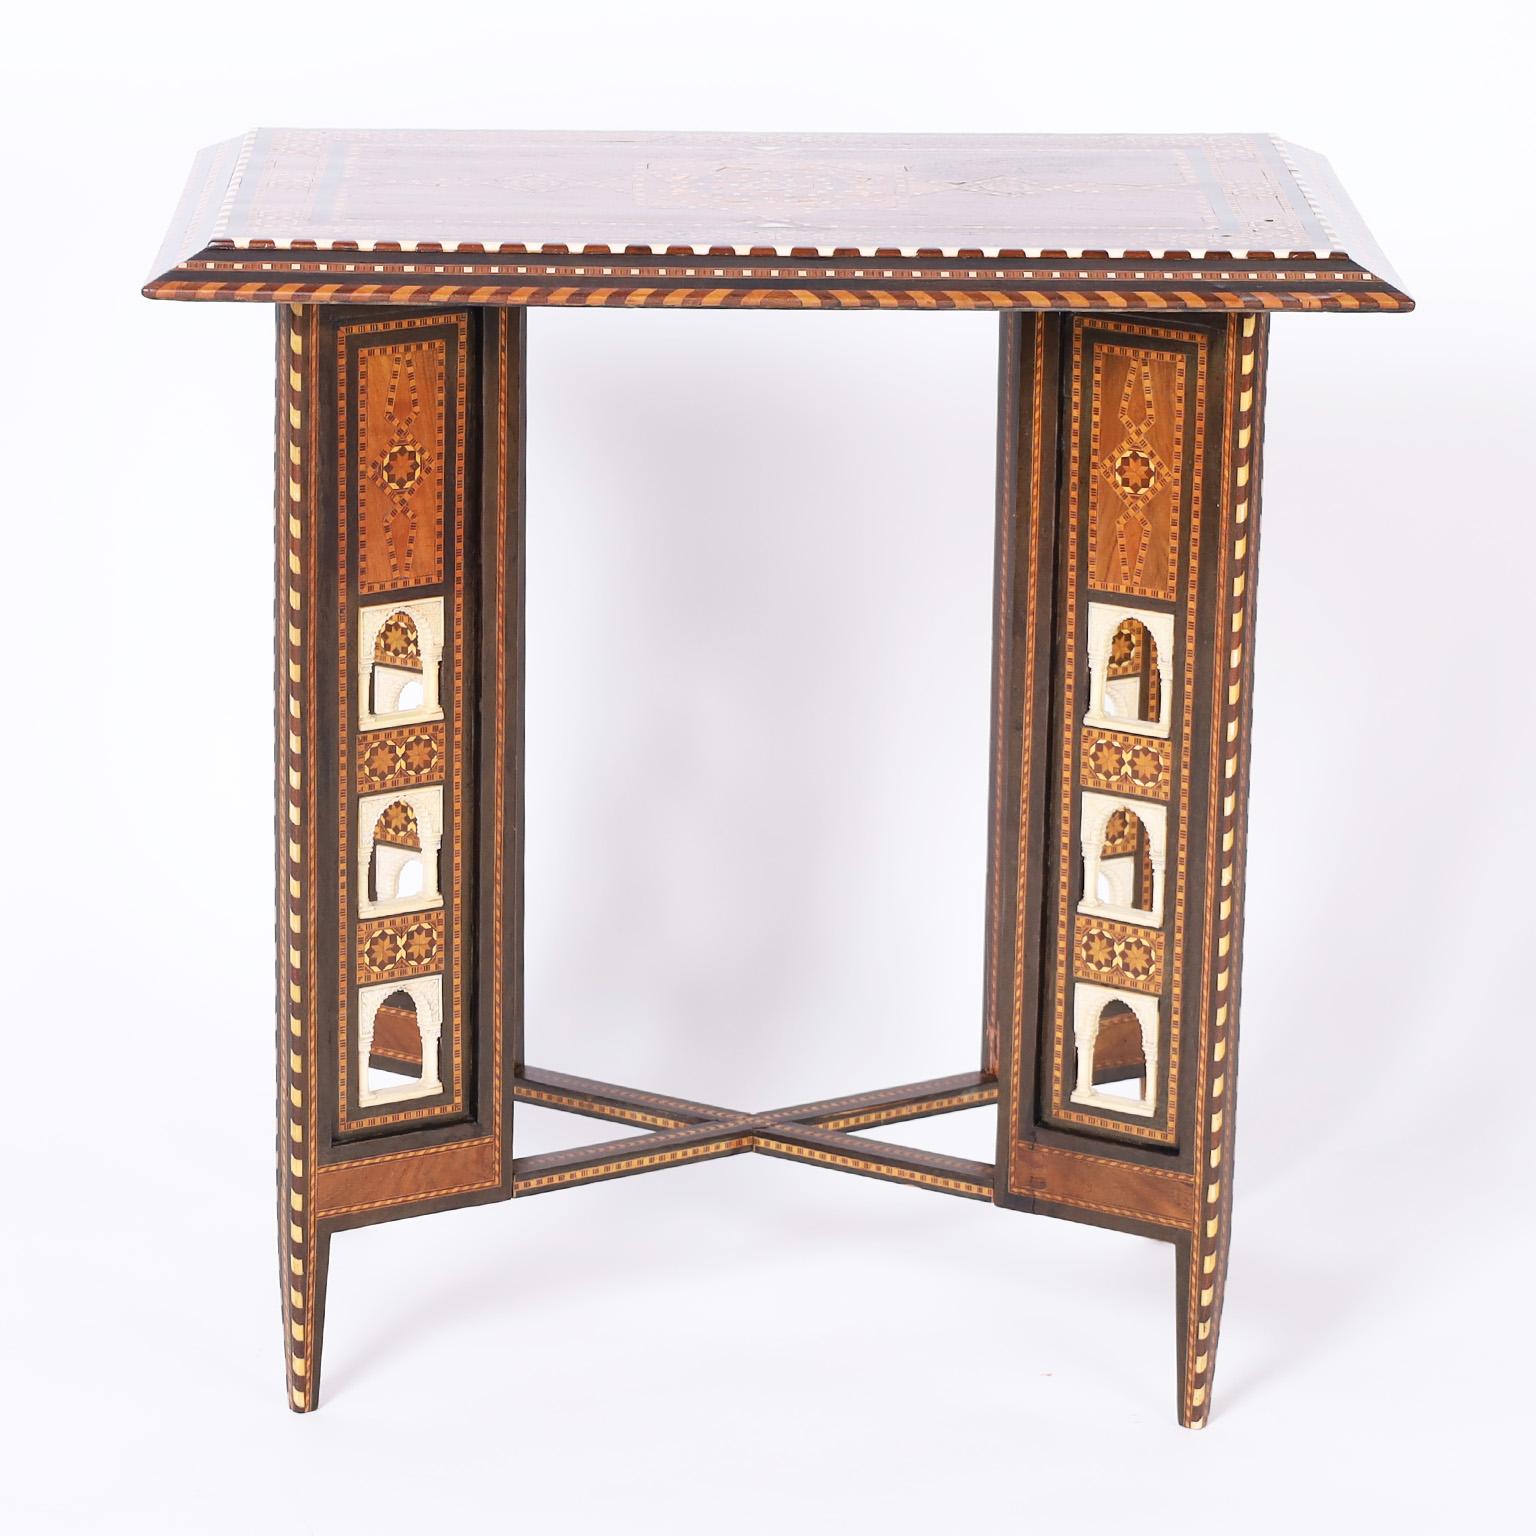 Near Eastern antique table or stand crafted in walnut featuring a rectangular top inlaid with geometric designs using bone and exotic hardwoods. The base has an unusual X form with geometric inlays and carved bone moorish arches over tapered legs.